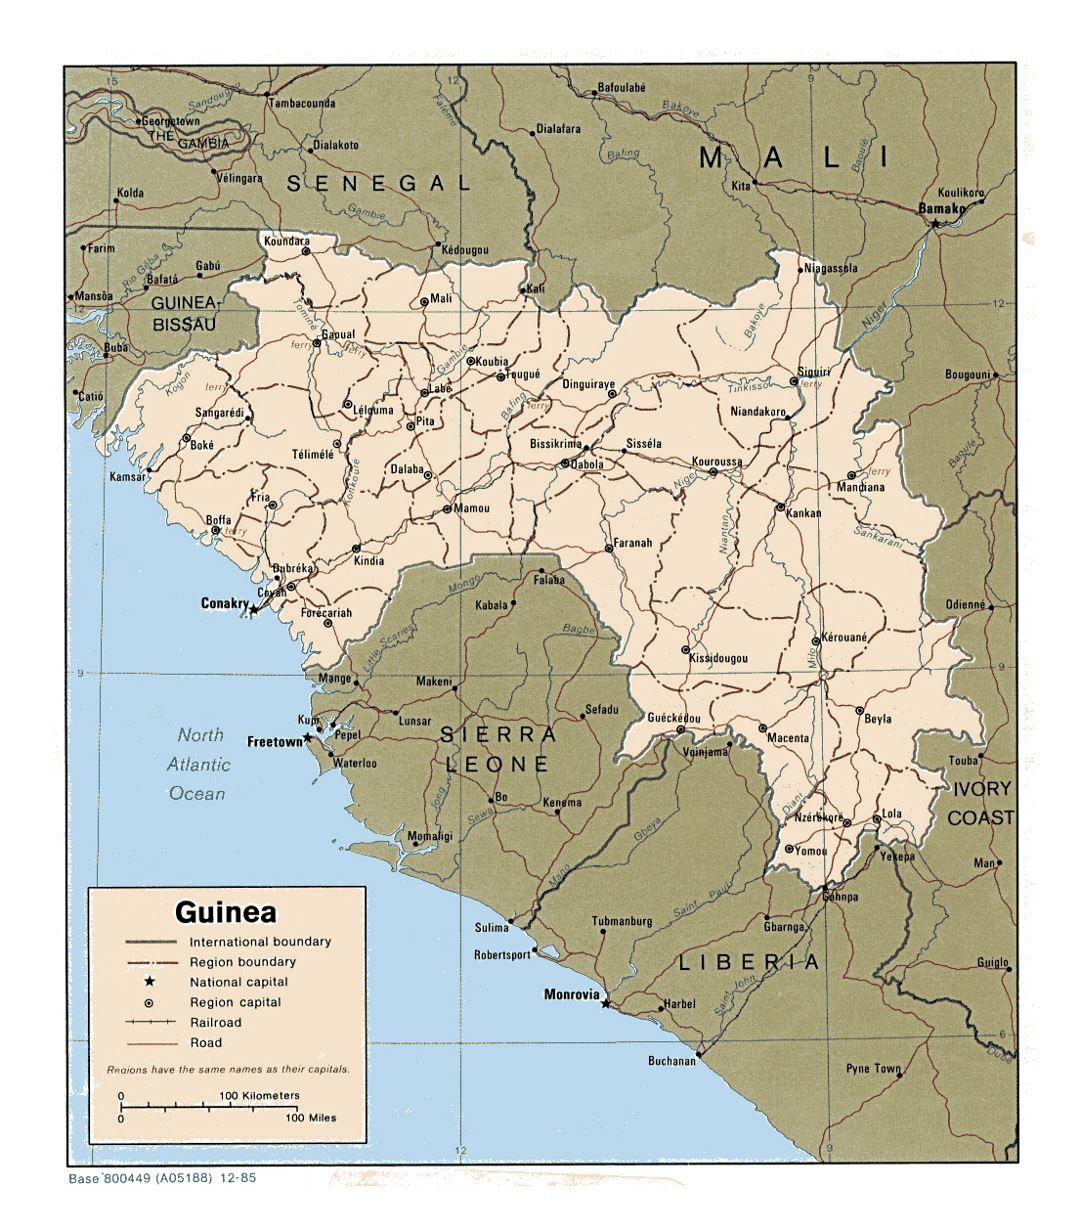 Detailed political and administrative map of Guinea with roads, railroads and major cities - 1985